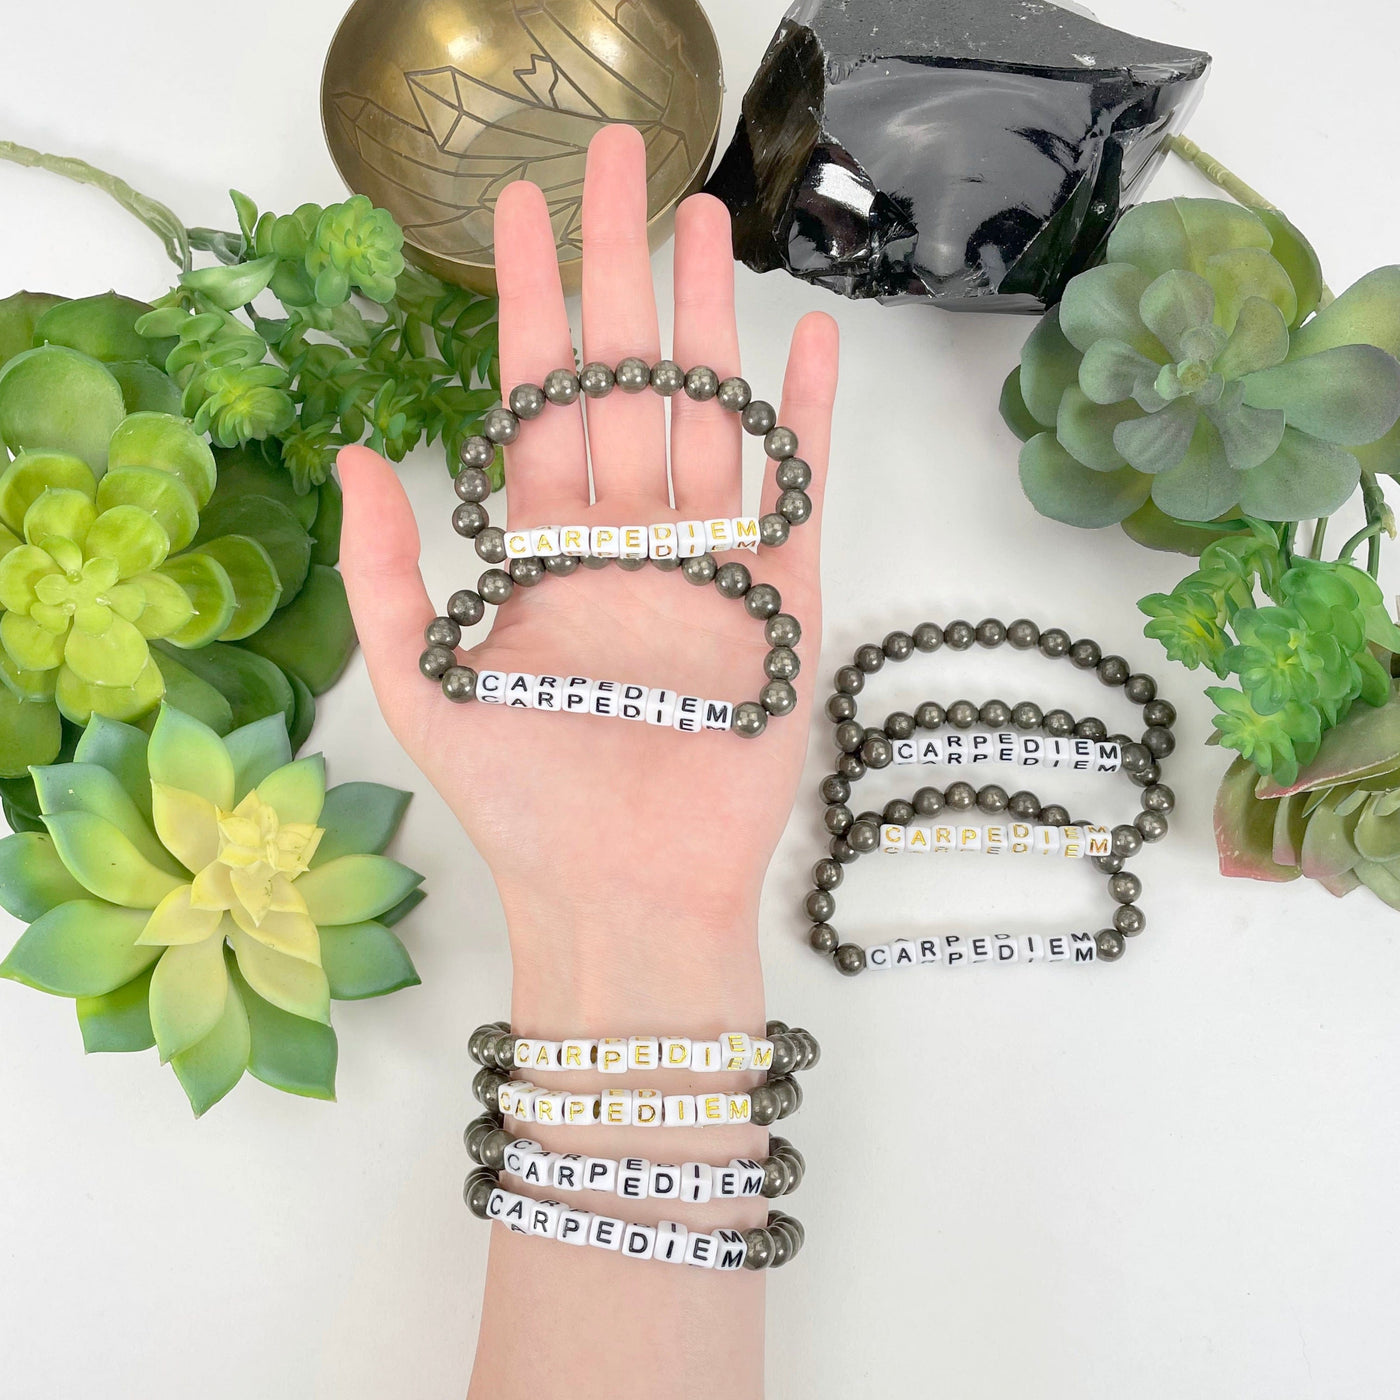 pyrite beaded bracelet in hand and on wrist with display